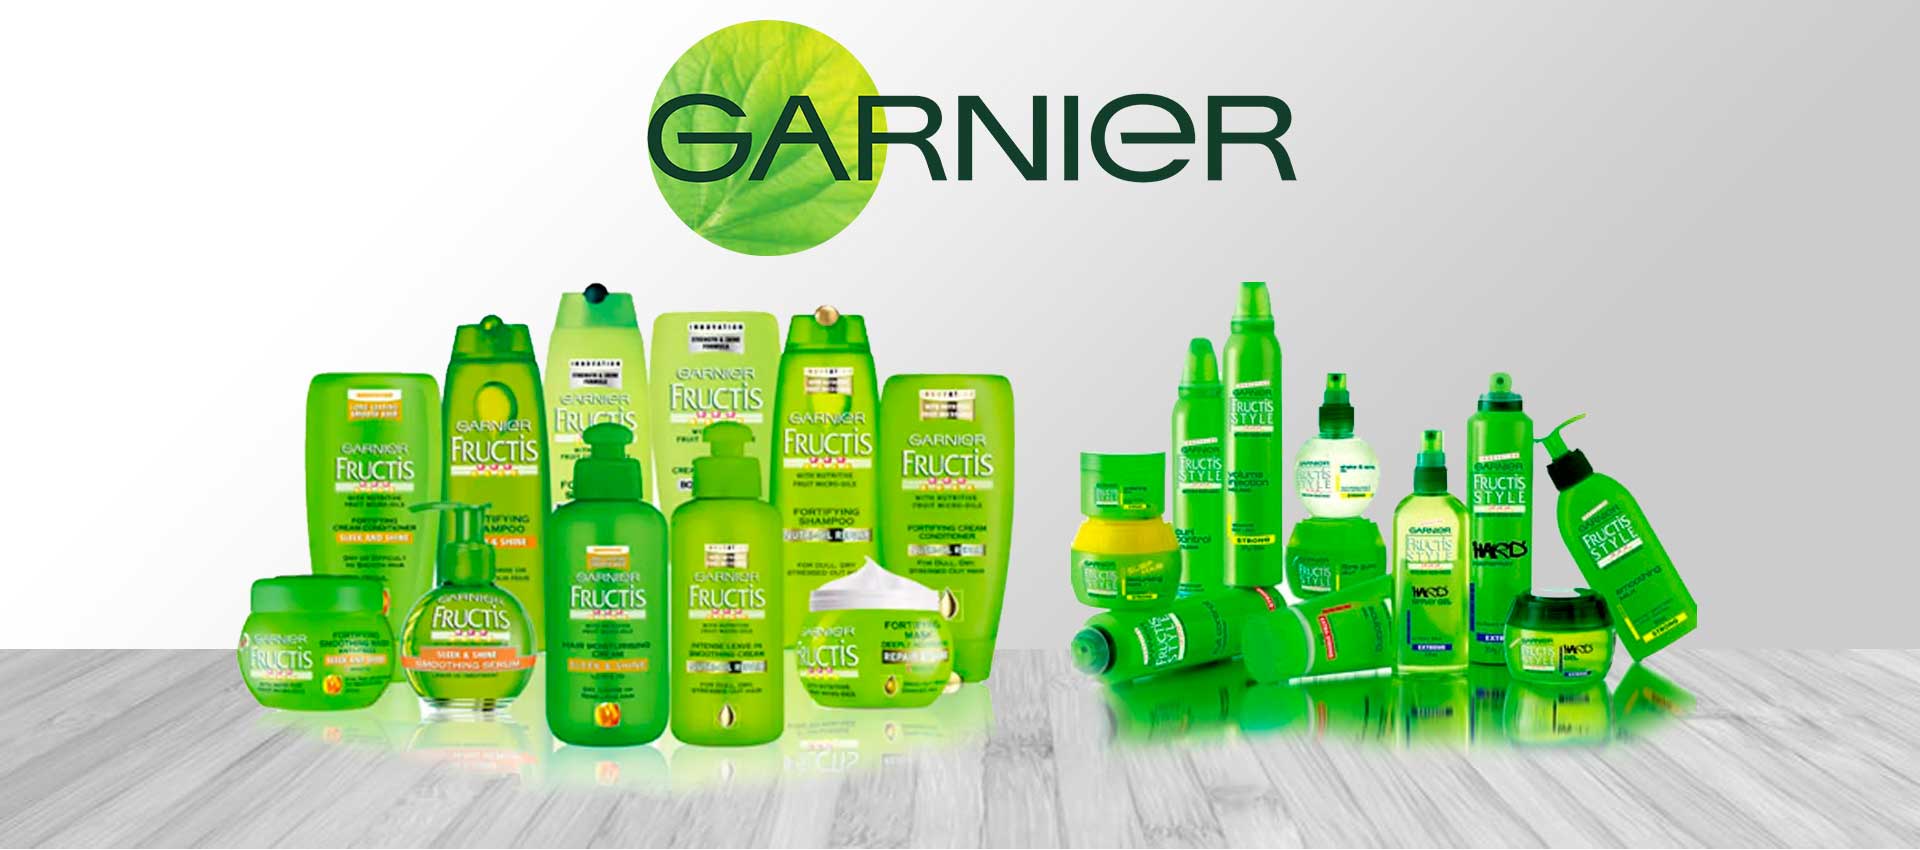 Garnier - The best Hair color brand for you in Pakistan